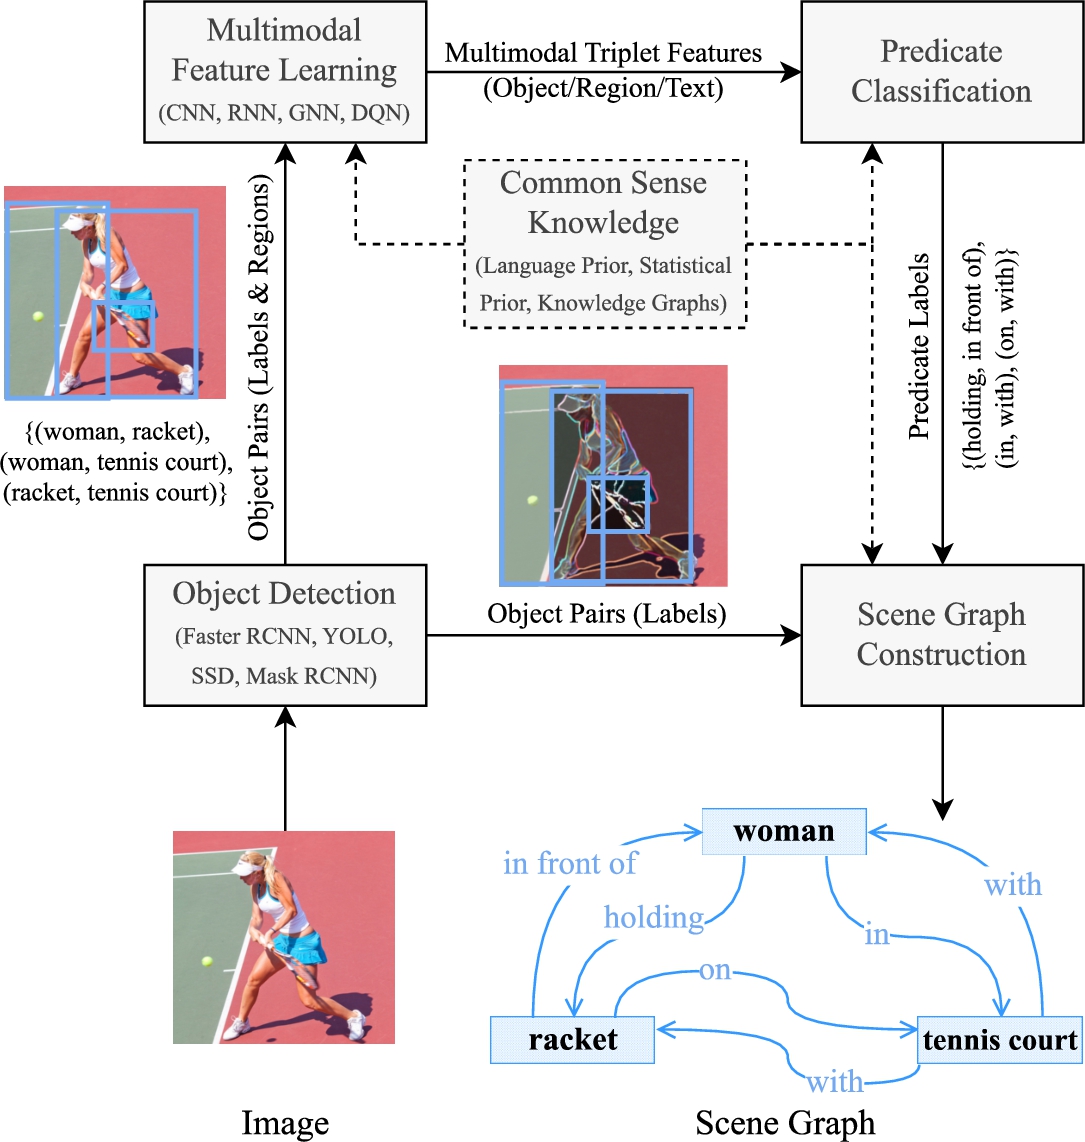 A schematic representation of the typical scene graph generation process (beginning at the bottom left and concluding at the bottom right) that comprises object detection, multimodal feature learning, common sense knowledge infusion, relationship predicate classification, and scene graph construction.